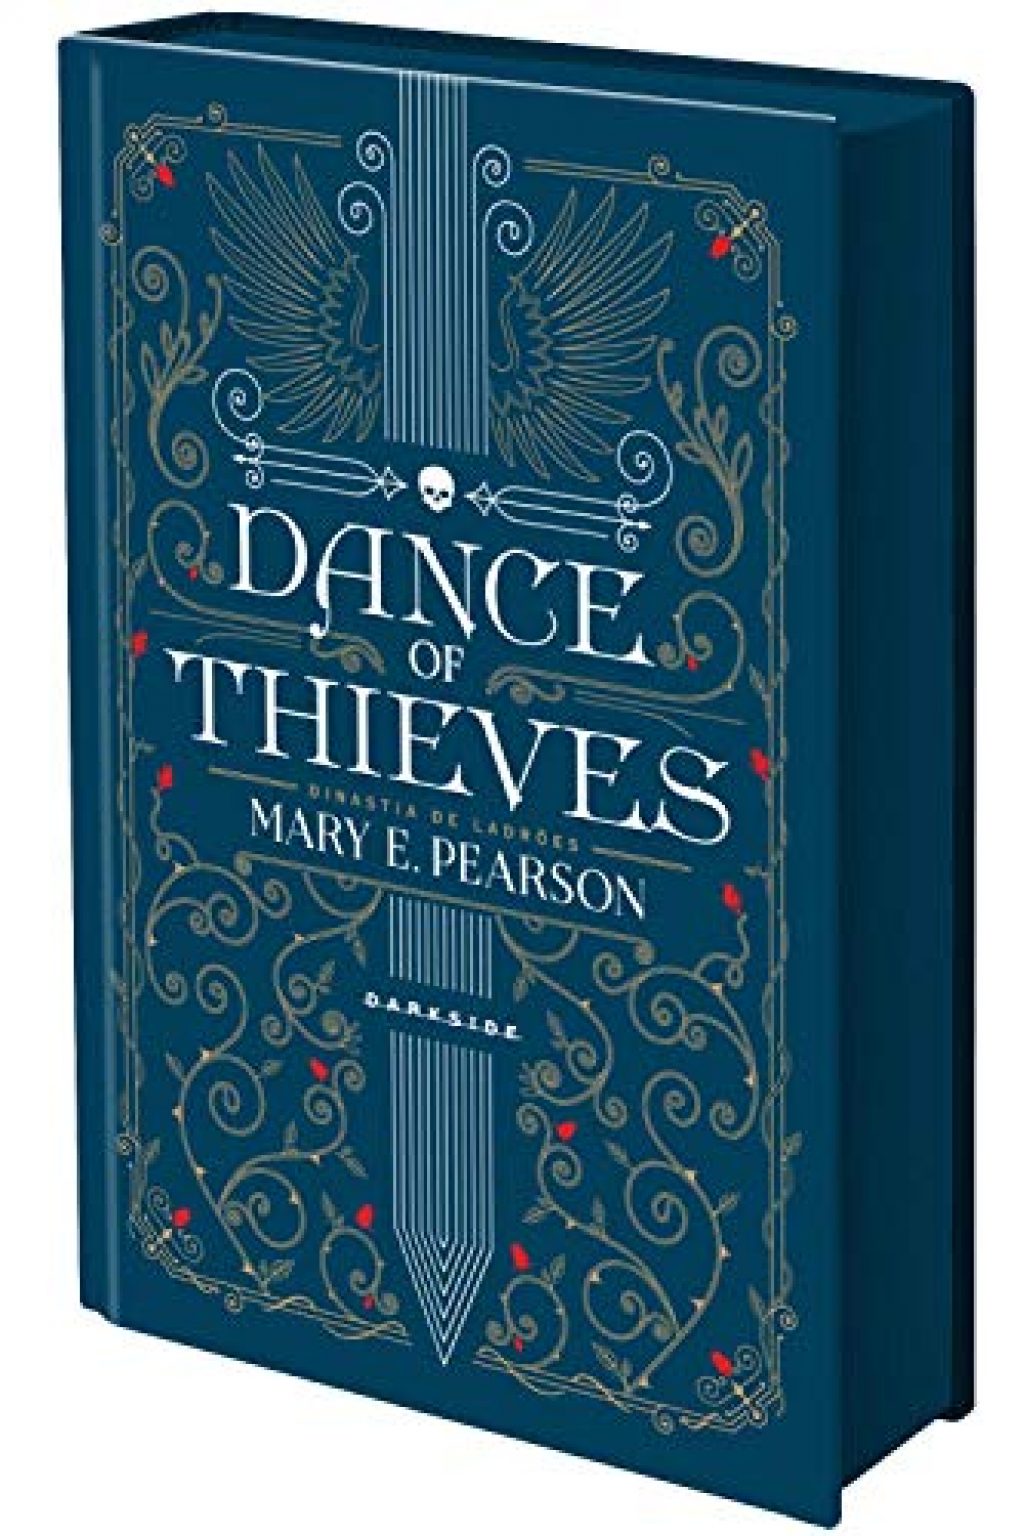 dance of thieves about